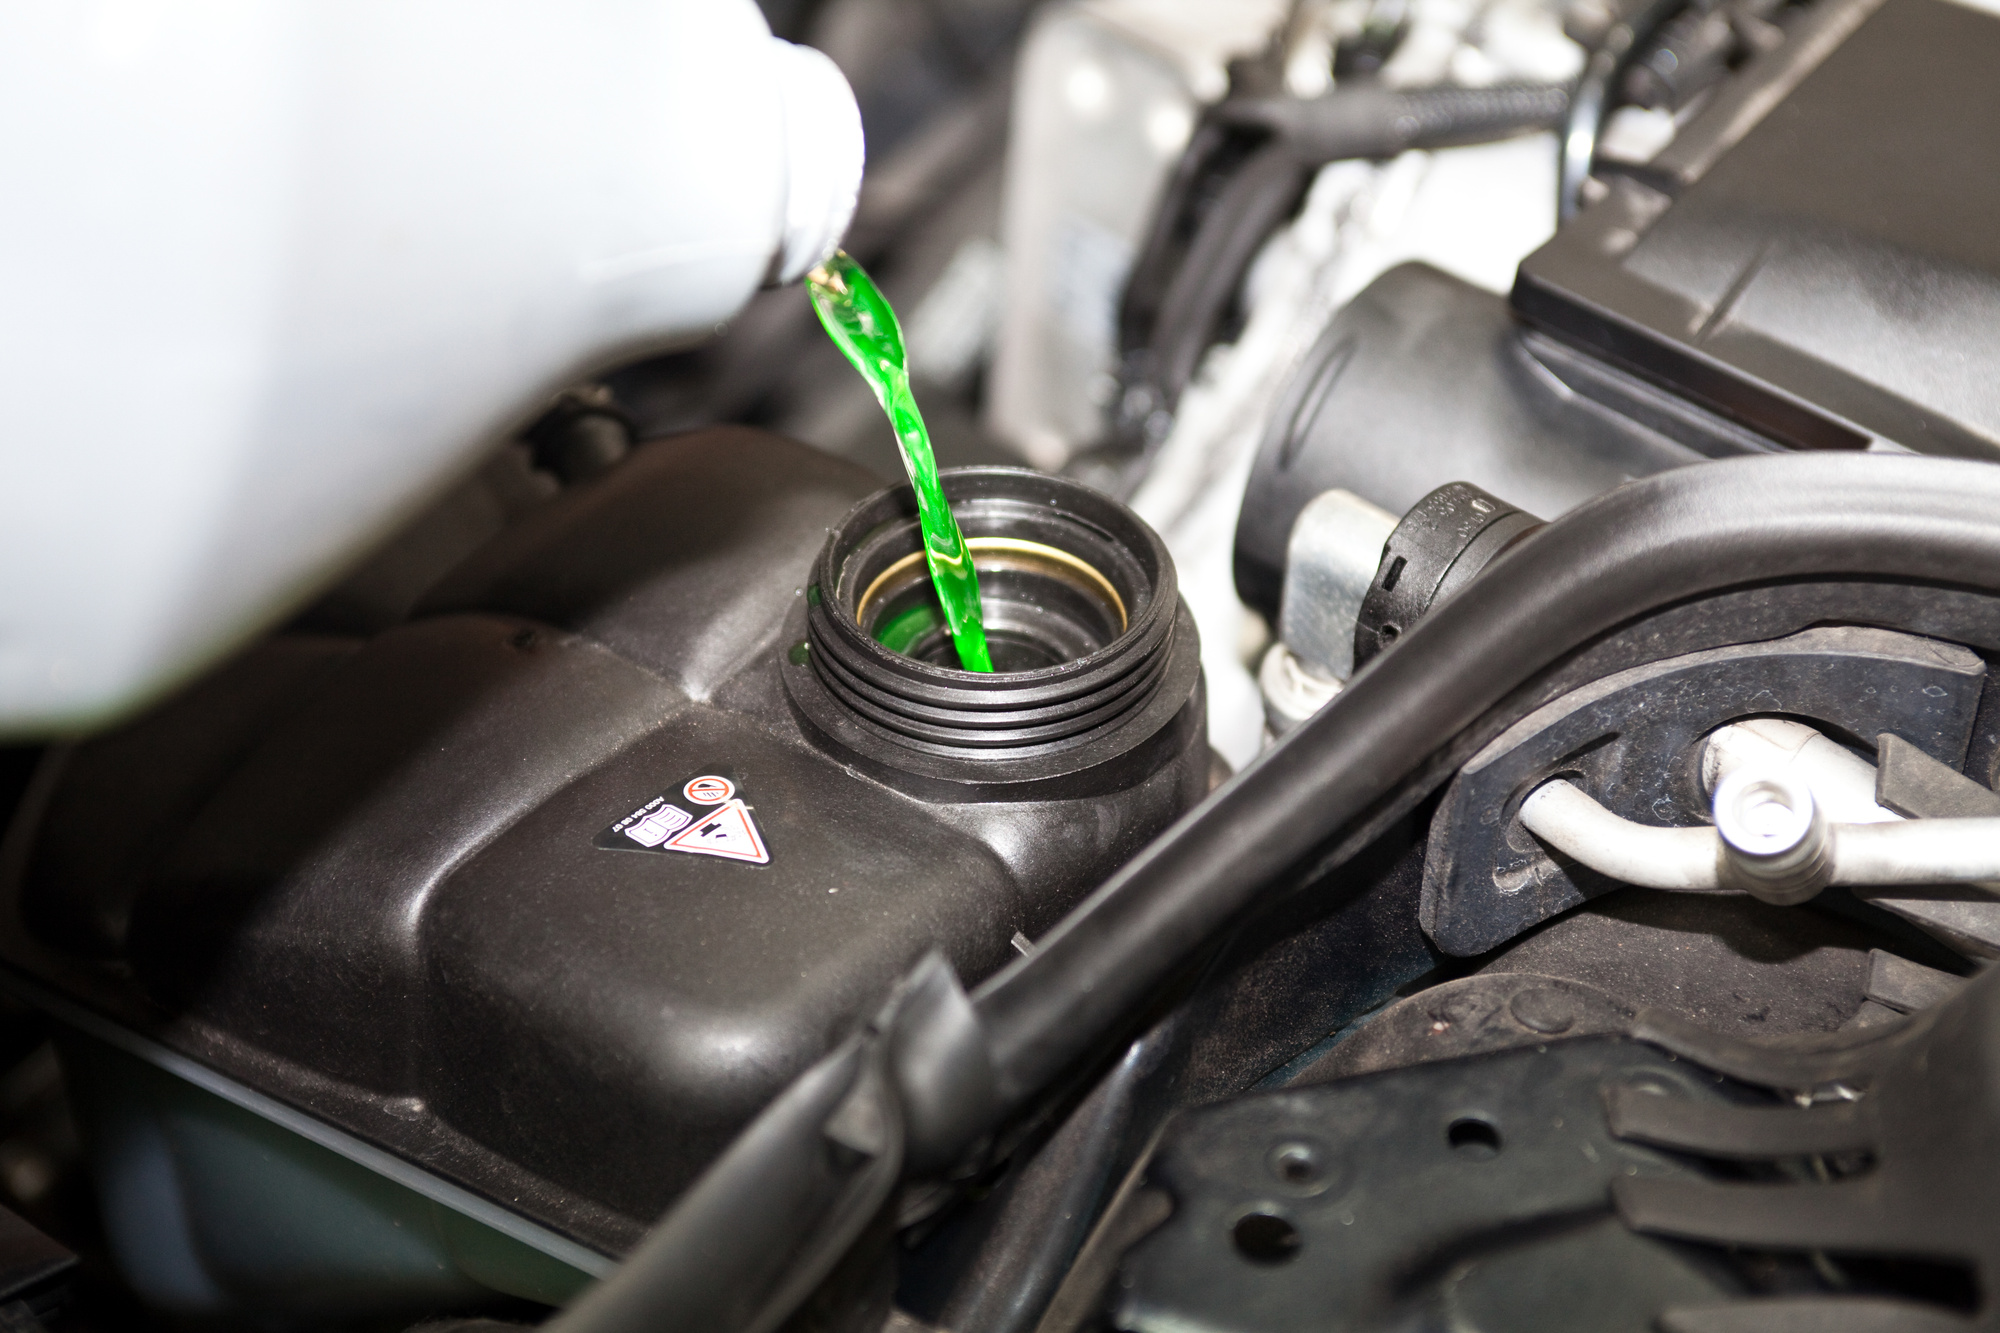 DIY Guide on How to Replace BMW Engine Coolant (Antifreeze)